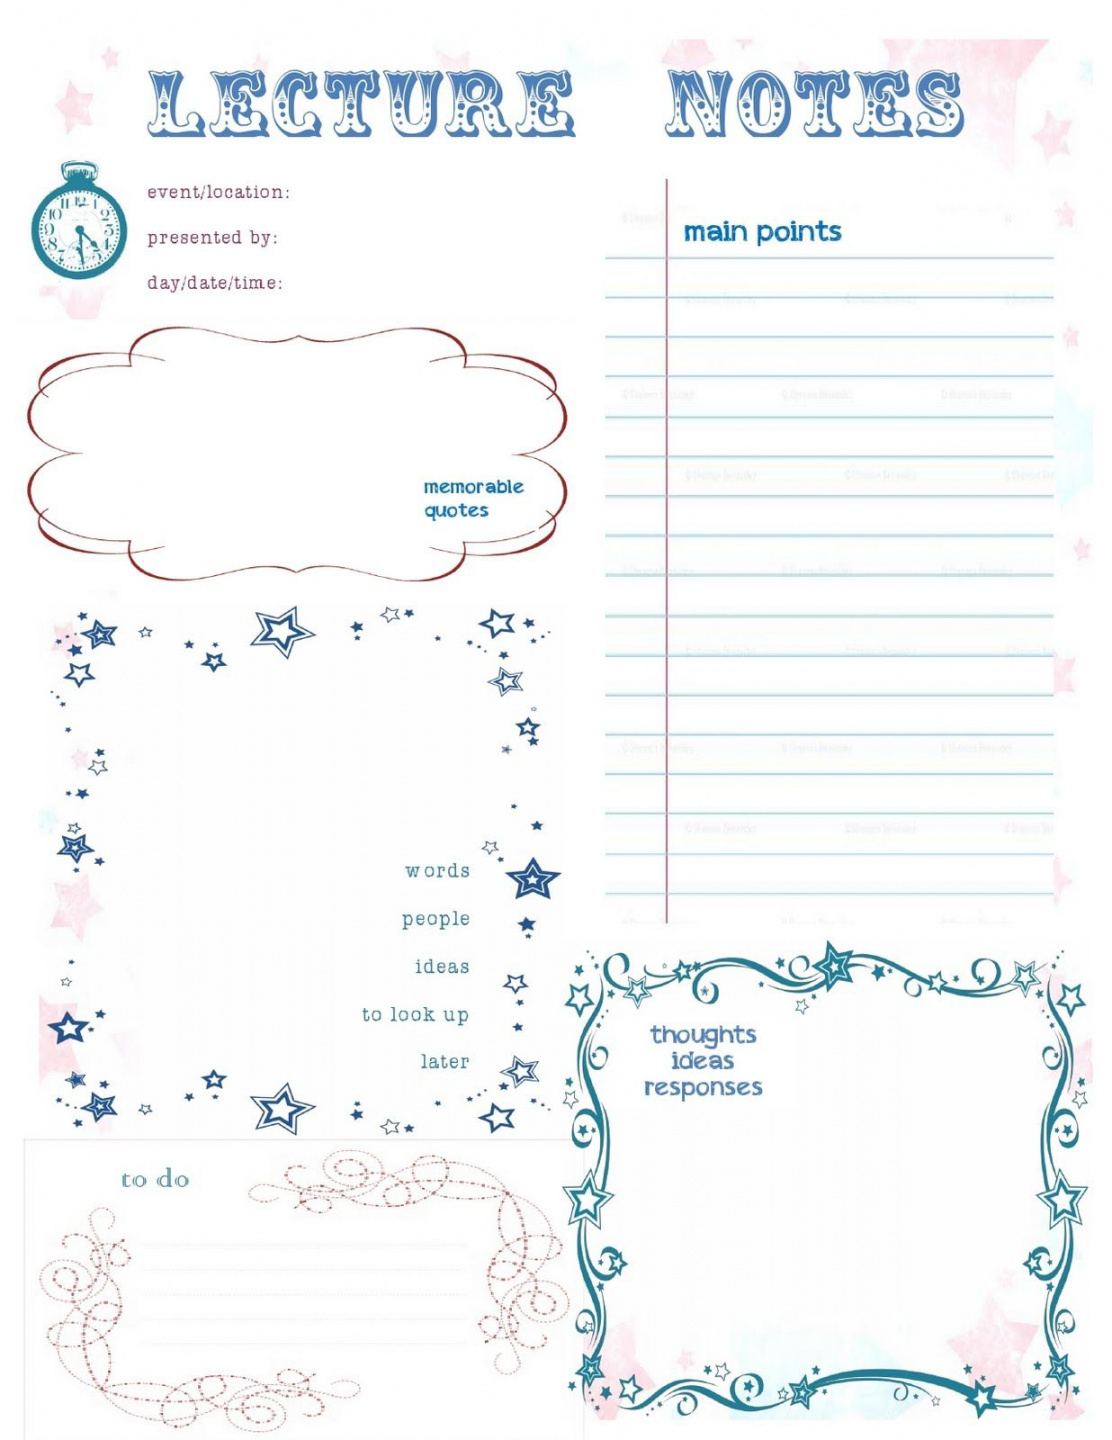 editable the yorktown owens printable lecture notes cheat nursing school note taking template doc